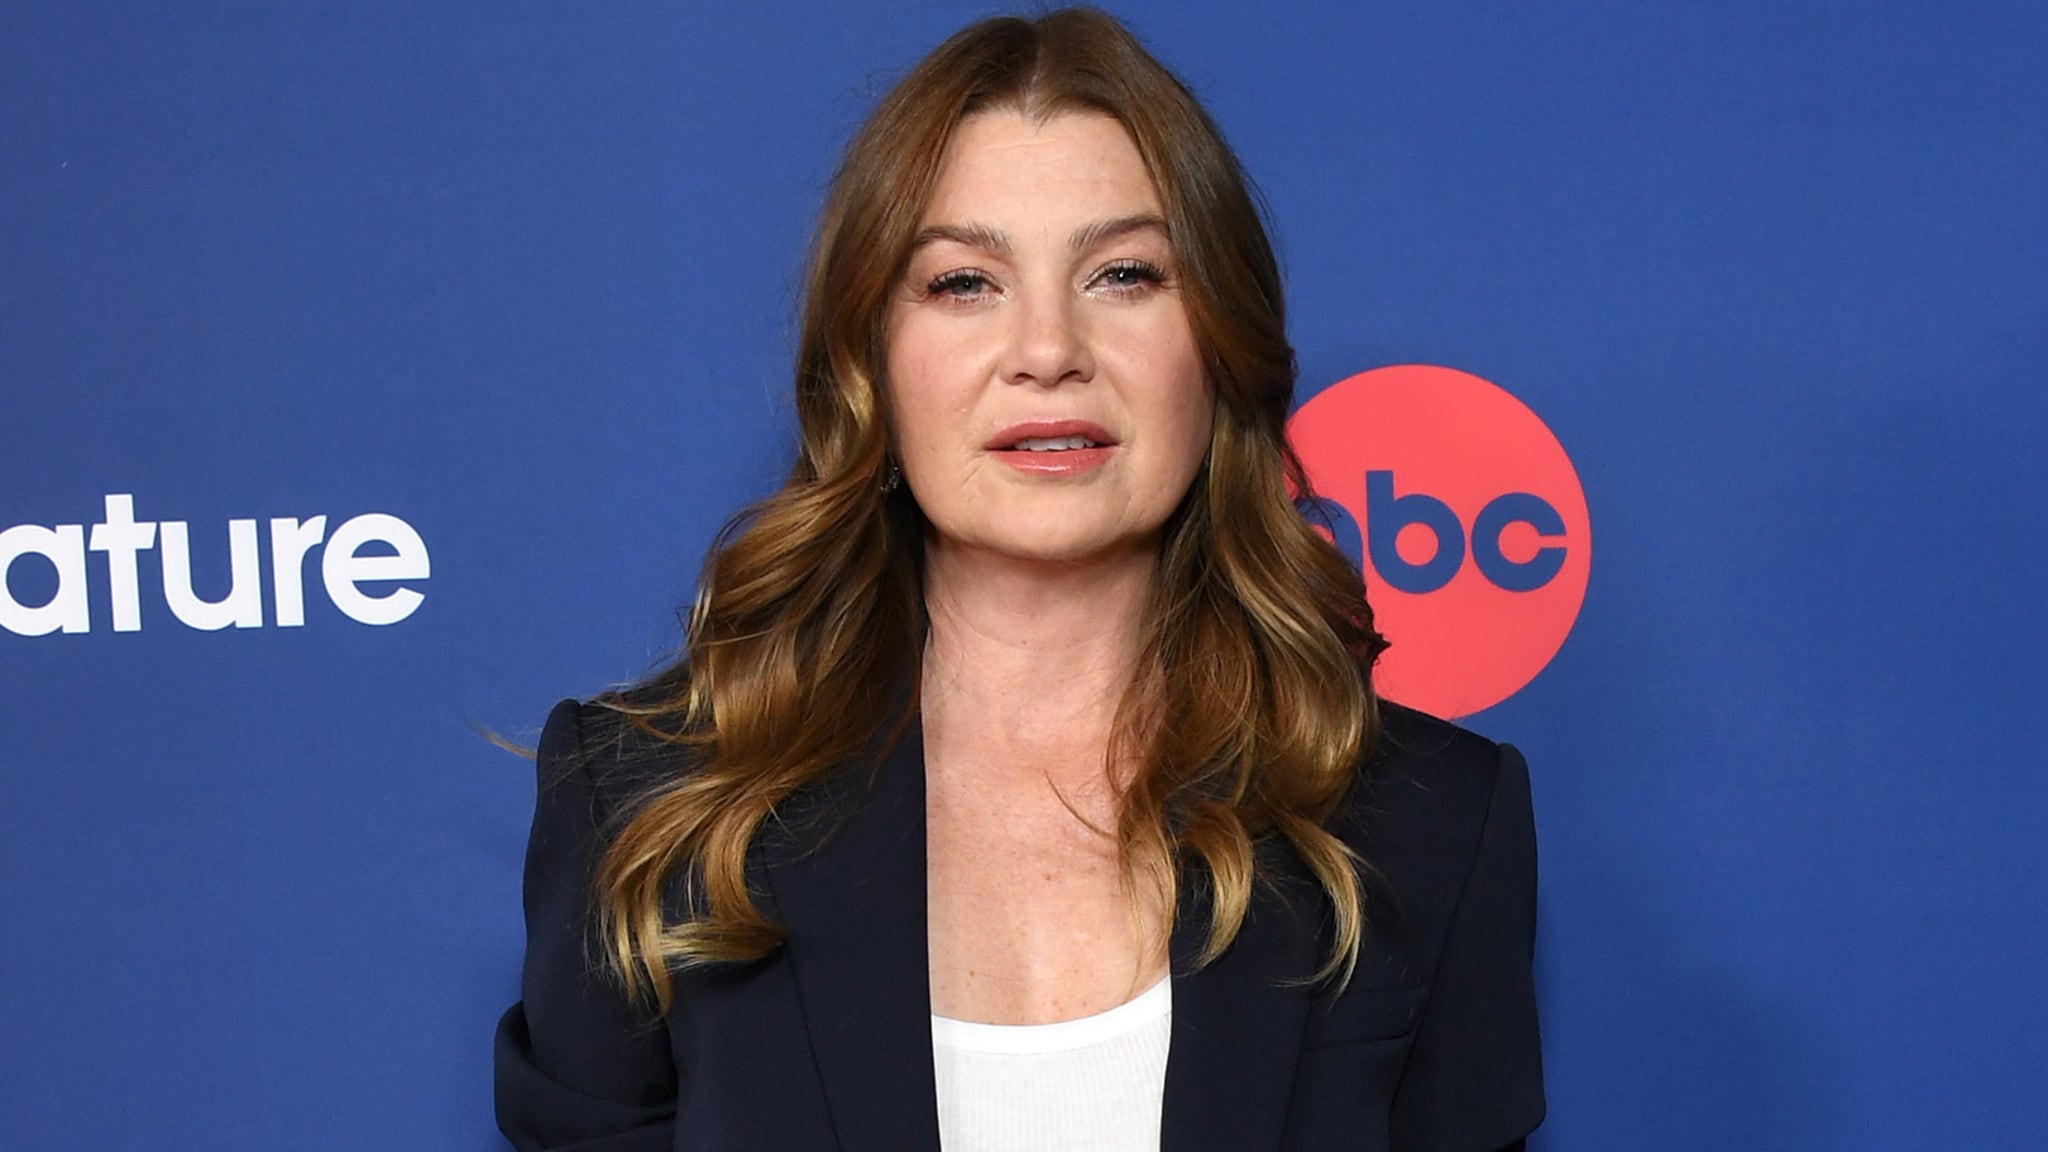 Ellen Pompeo To Star and Exec Produce Hulu Series, Will Scale Back Grey’s Anatomy Role